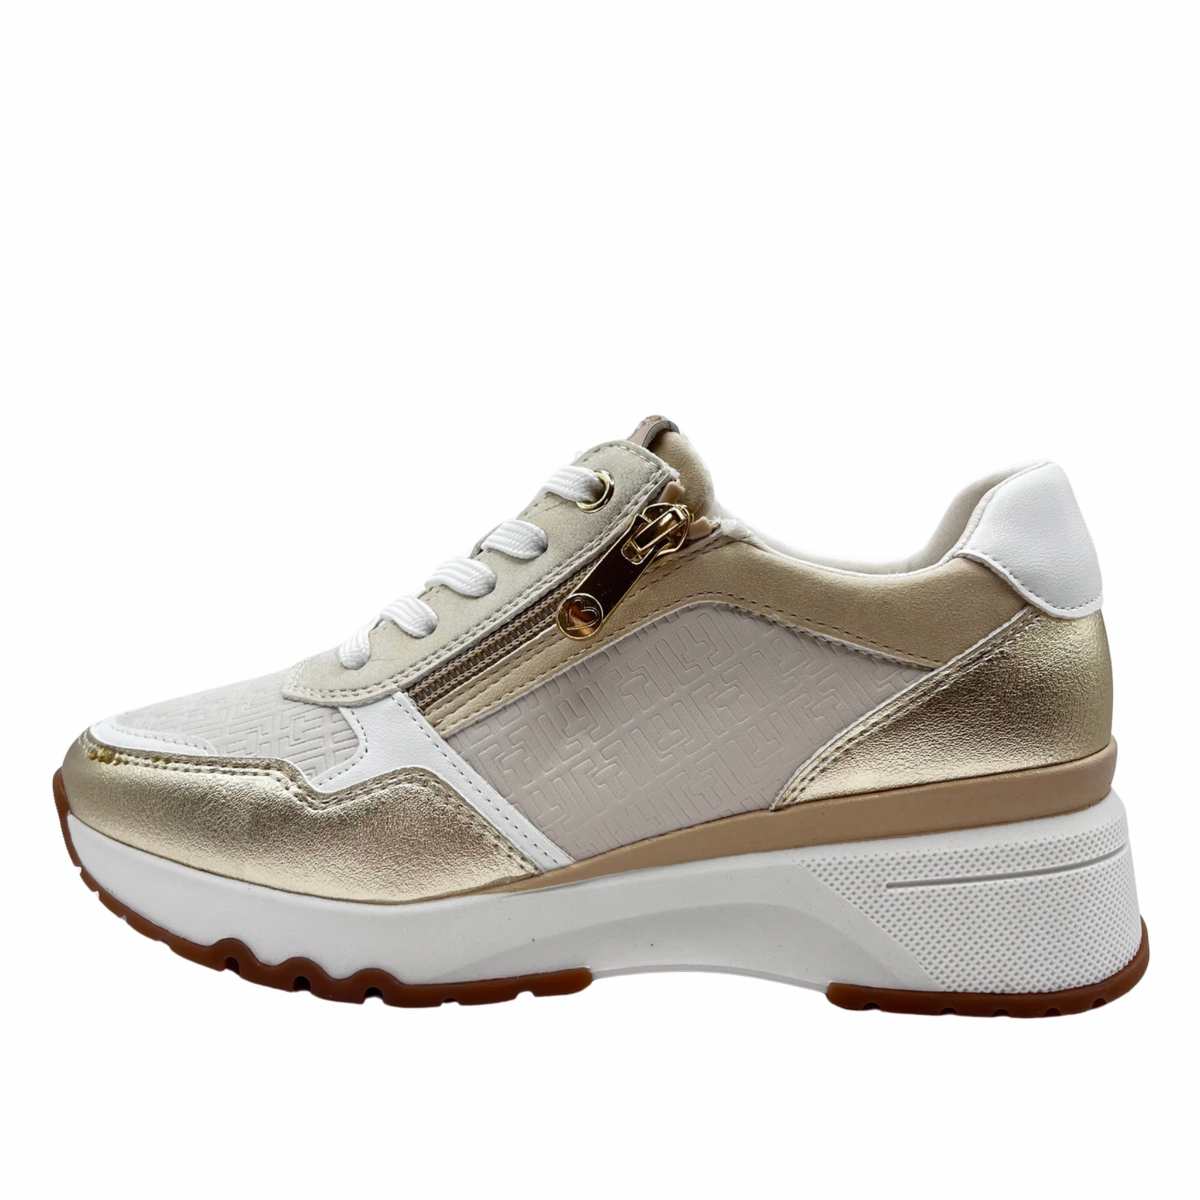 Marco Tozzi Cream and Gold Trainer